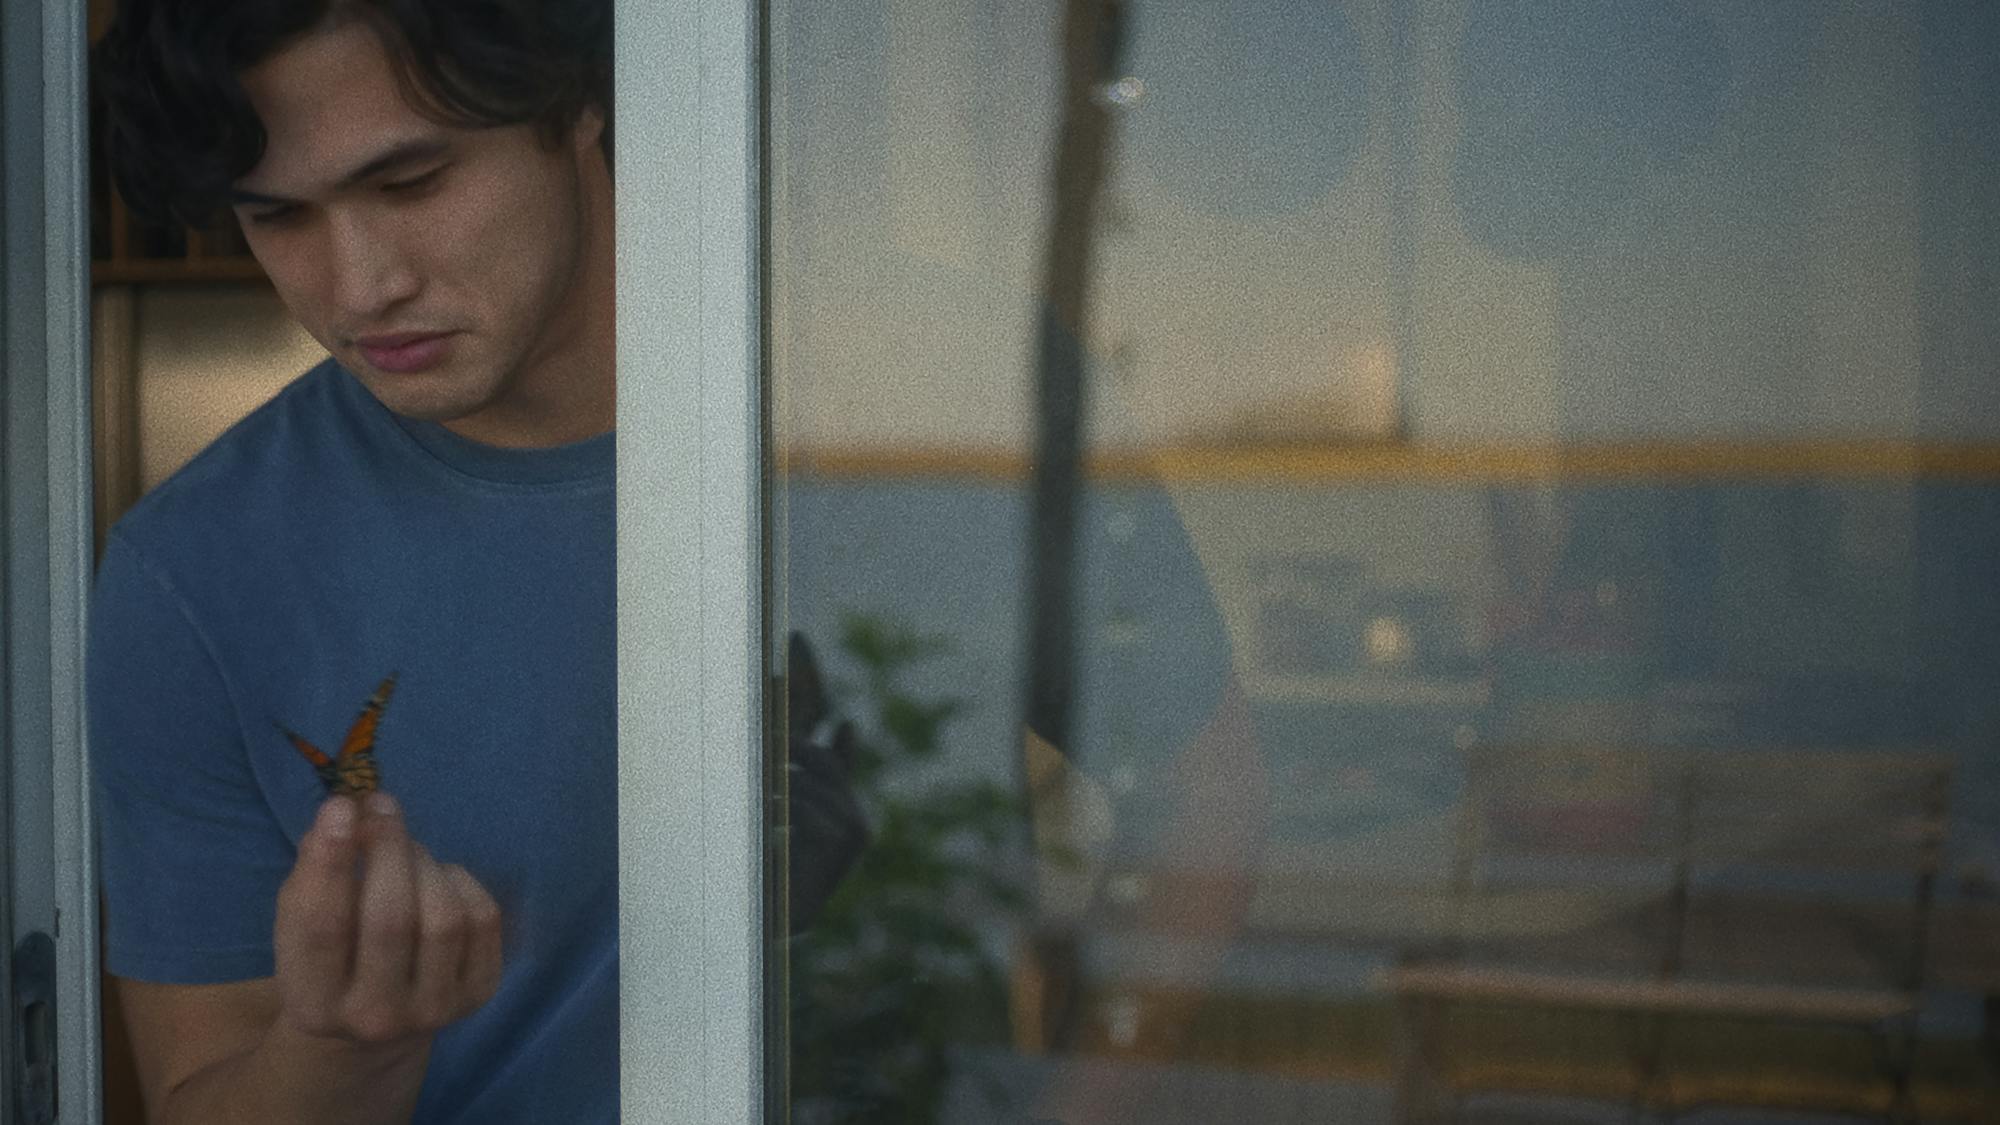 Joe Atherton-Yoo (Charles Melton) wears a blue t-shirt and holds a butterfly out the sliding glass door.